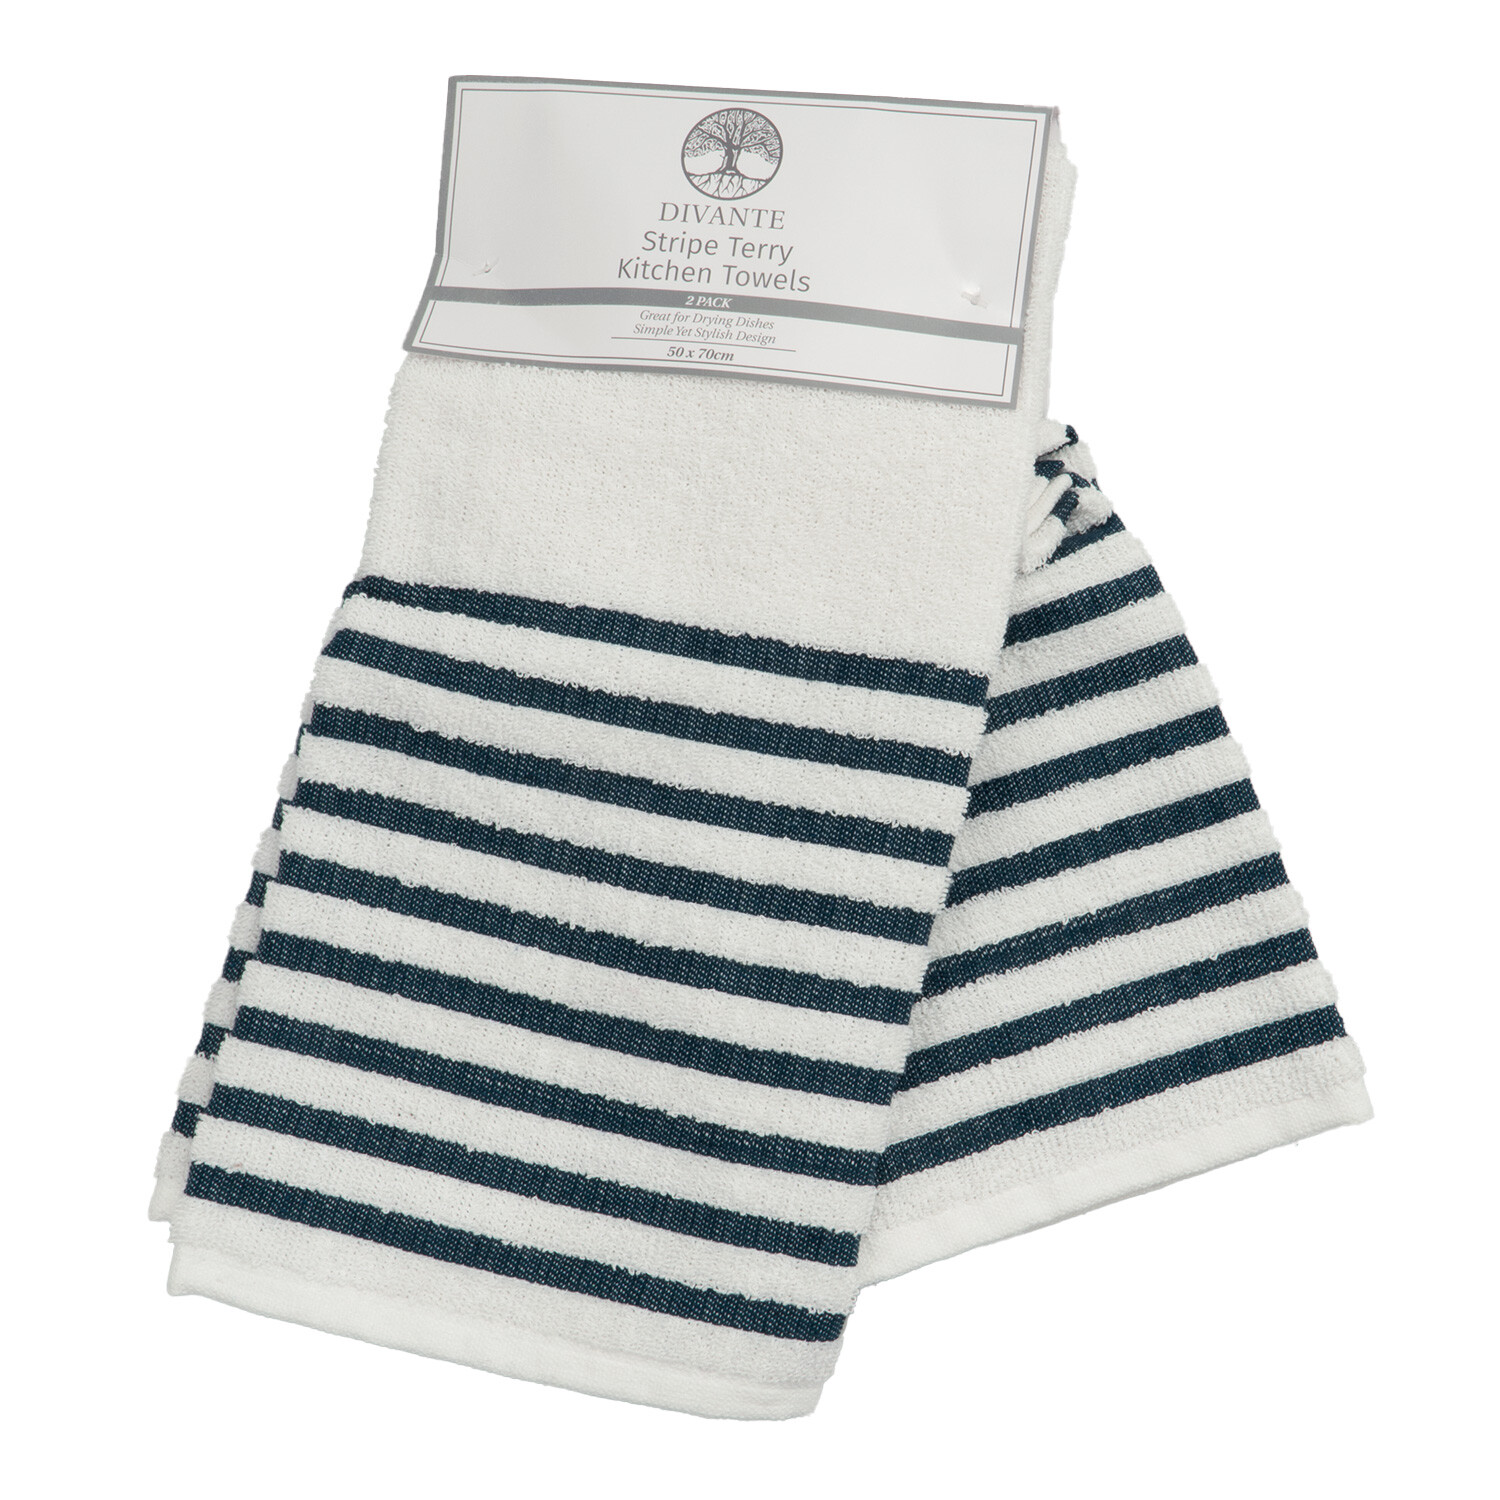 Pack of 2 Striped Terry Kitchen Towels - White & Navy Image 3